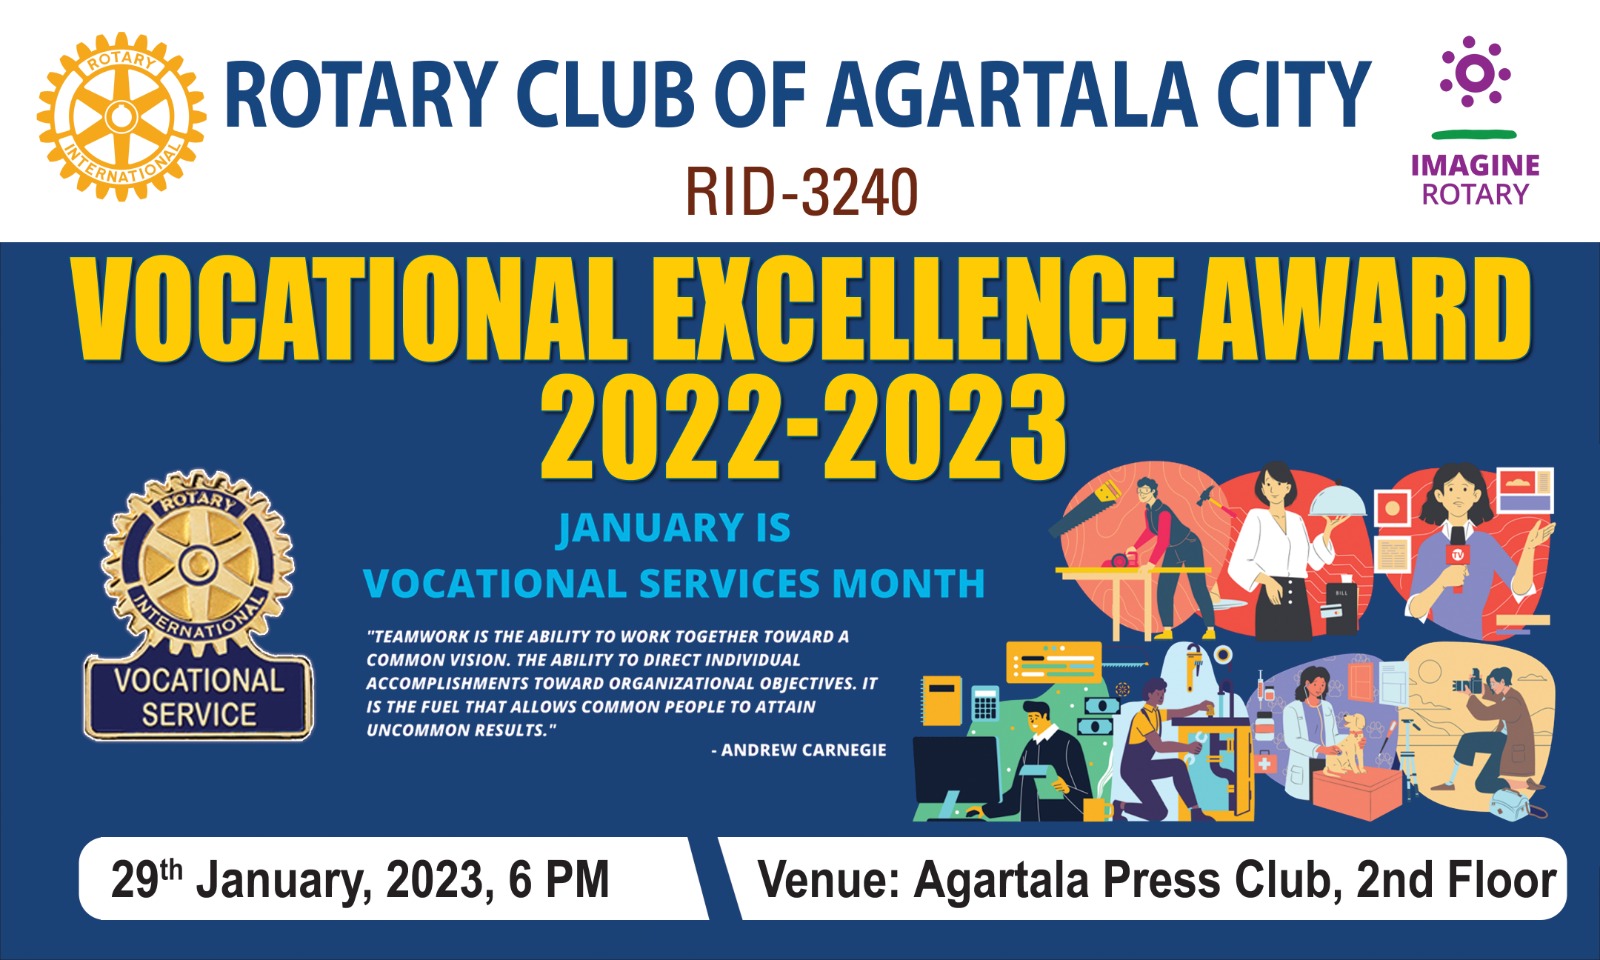 RCAC Vocational Excellence Awards 2023 on 29.1.2023 at Agartala Press Club.